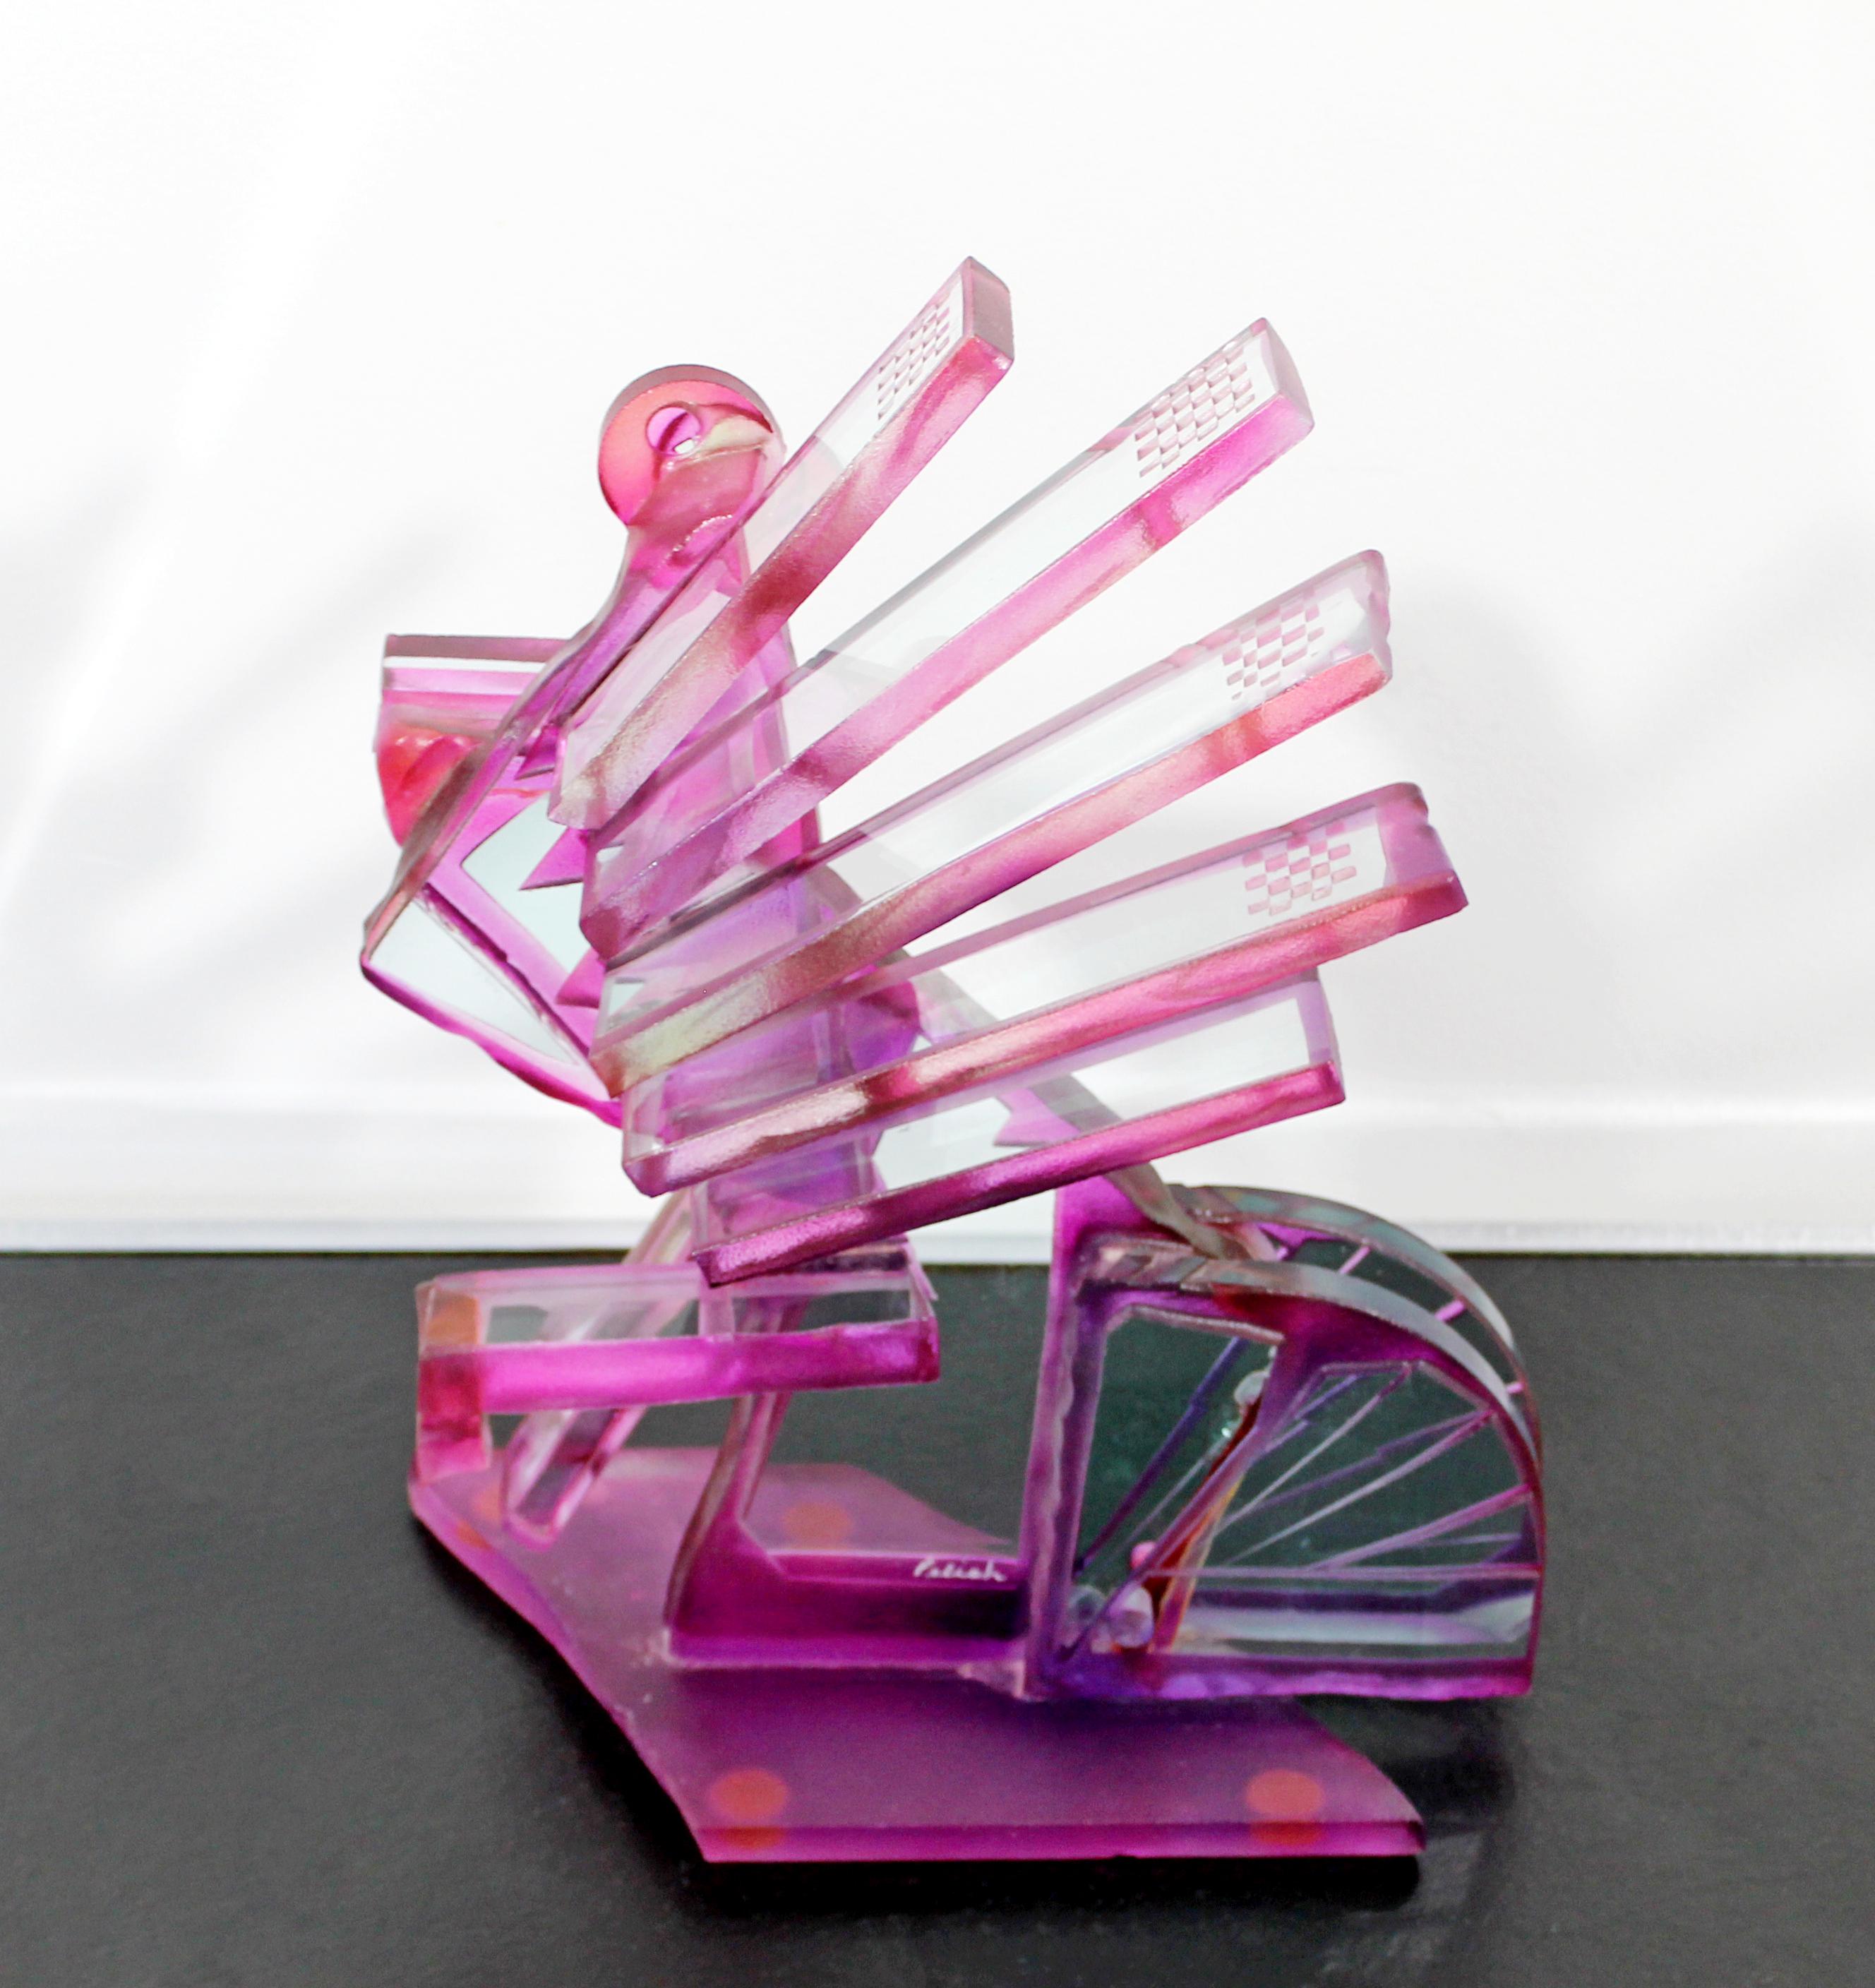 For your consideration is a breathtaking, art glass table sculpture of a bug or a bicycle, signed Susan Pelish, circa the 1990s. In excellent condition. The dimensions are 11.5